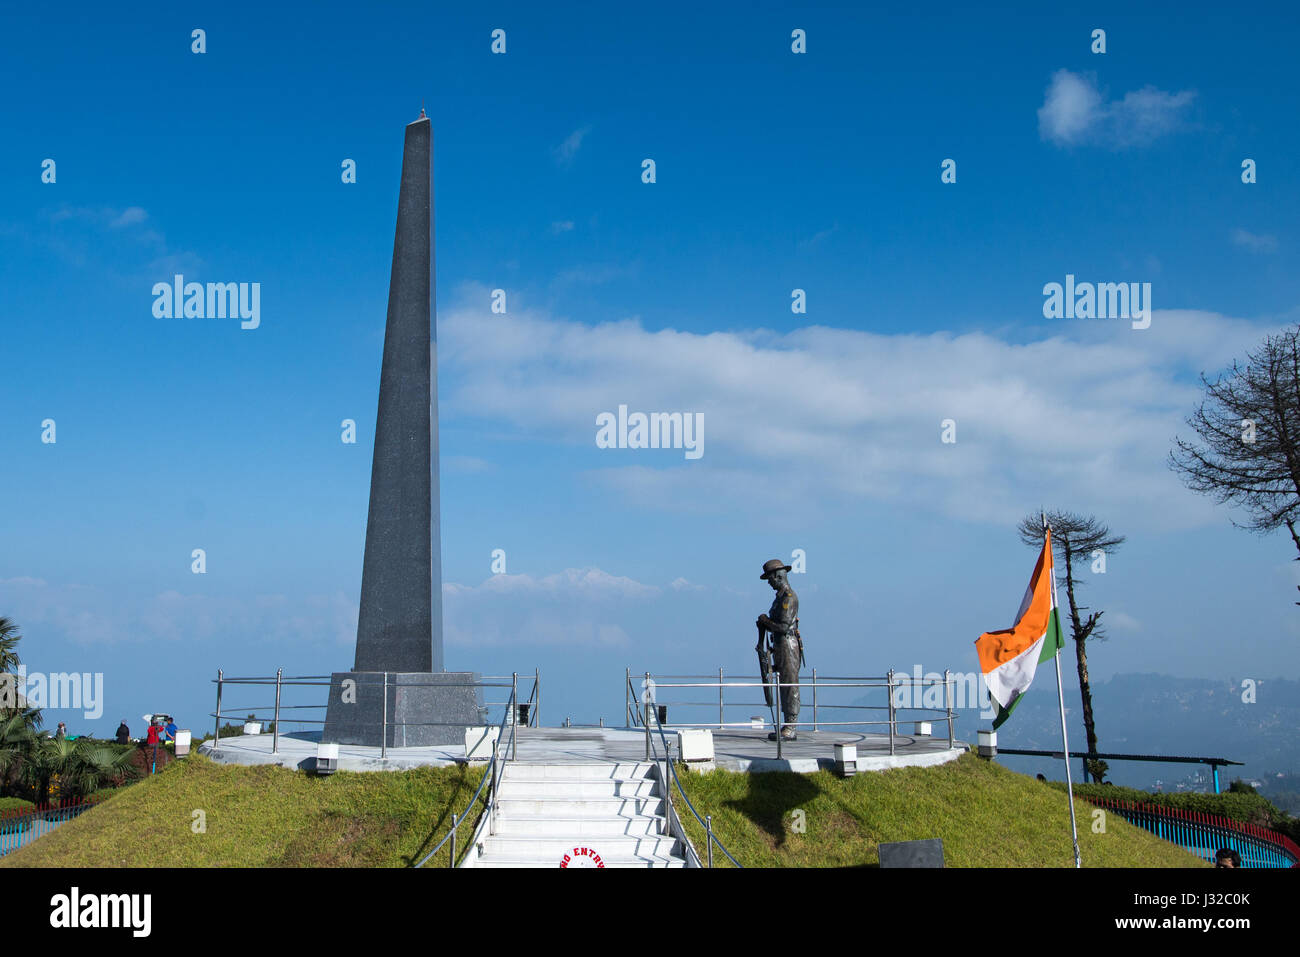 DARJEELING, INDIA – NOVEMBER 27, 2016: War memorial at the center of the Batasia Loop garden with Mt. Kanchenjunga in the background. This is a memori Stock Photo